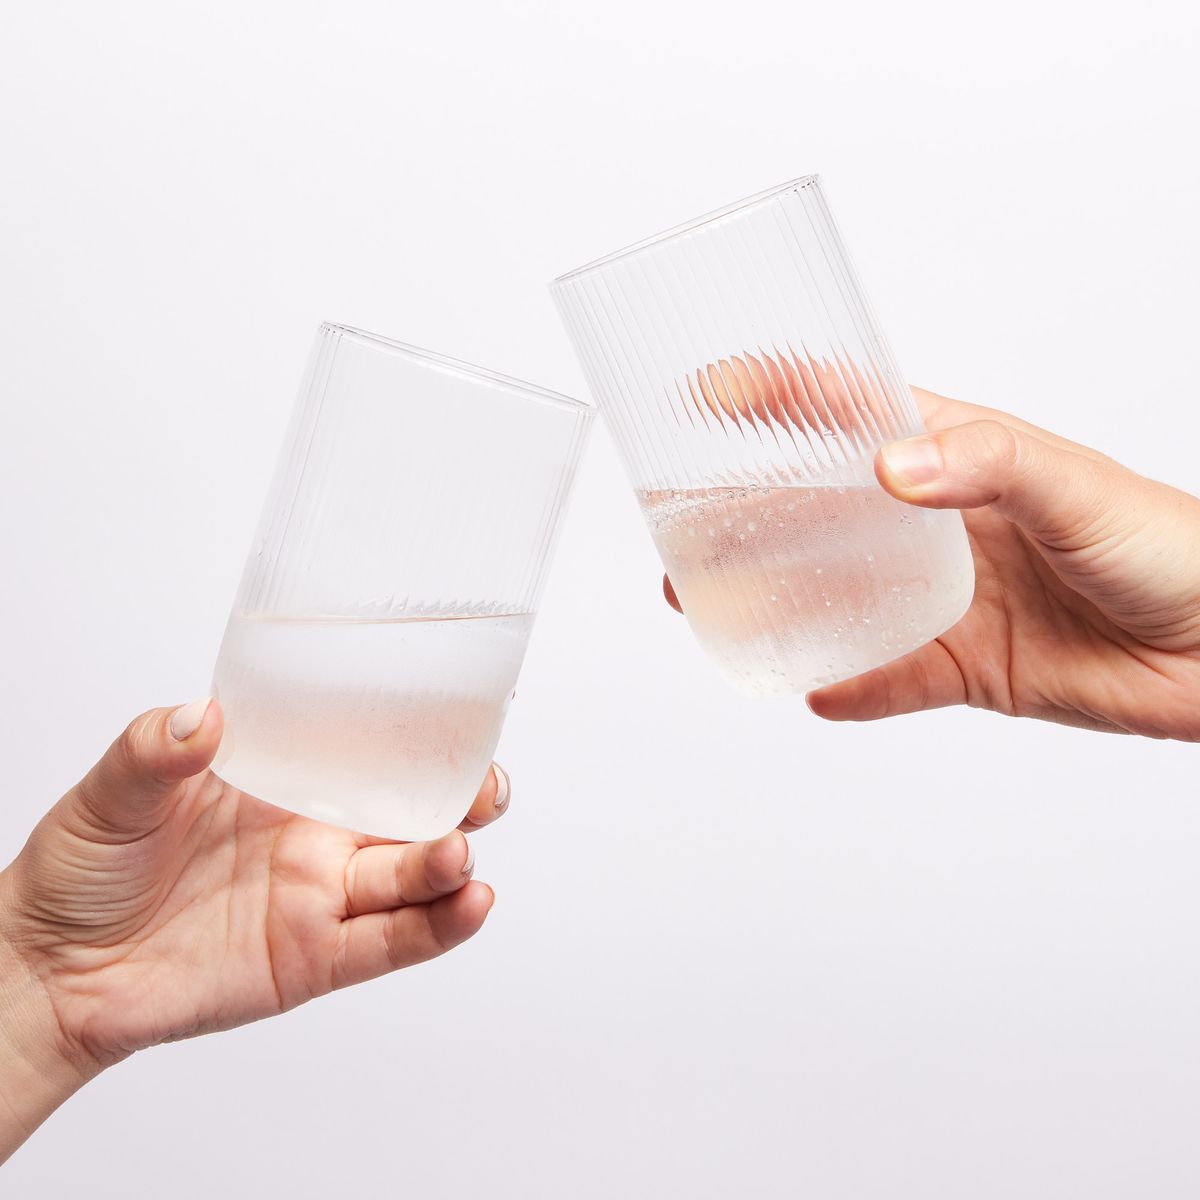 two hands holding two glasses half full of water towards each other